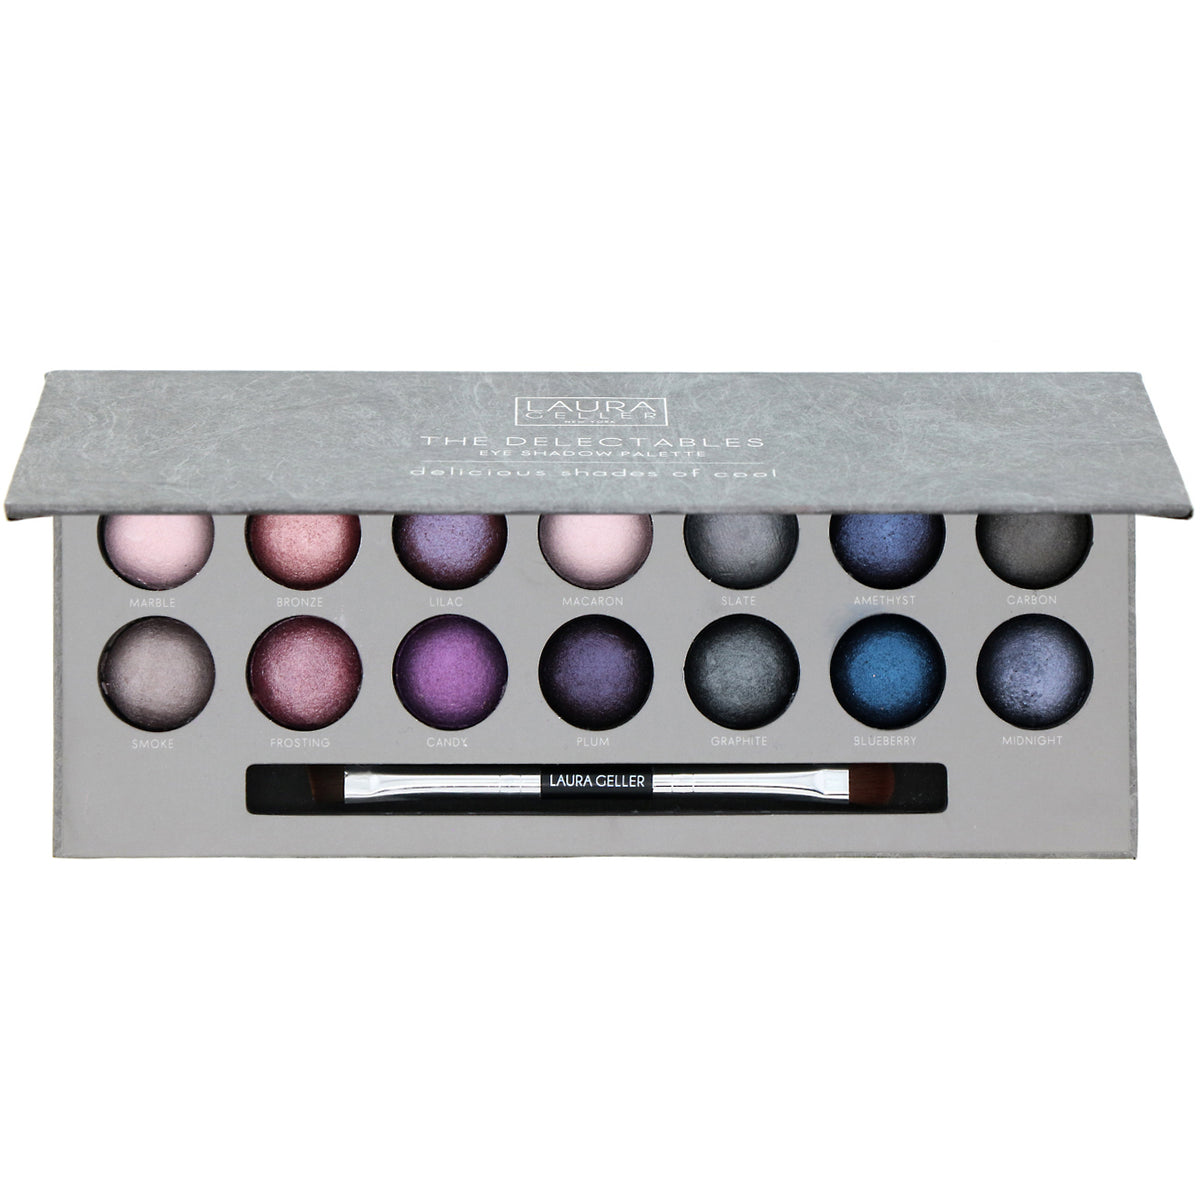 Delectables Eyeshadow Palette - Cool